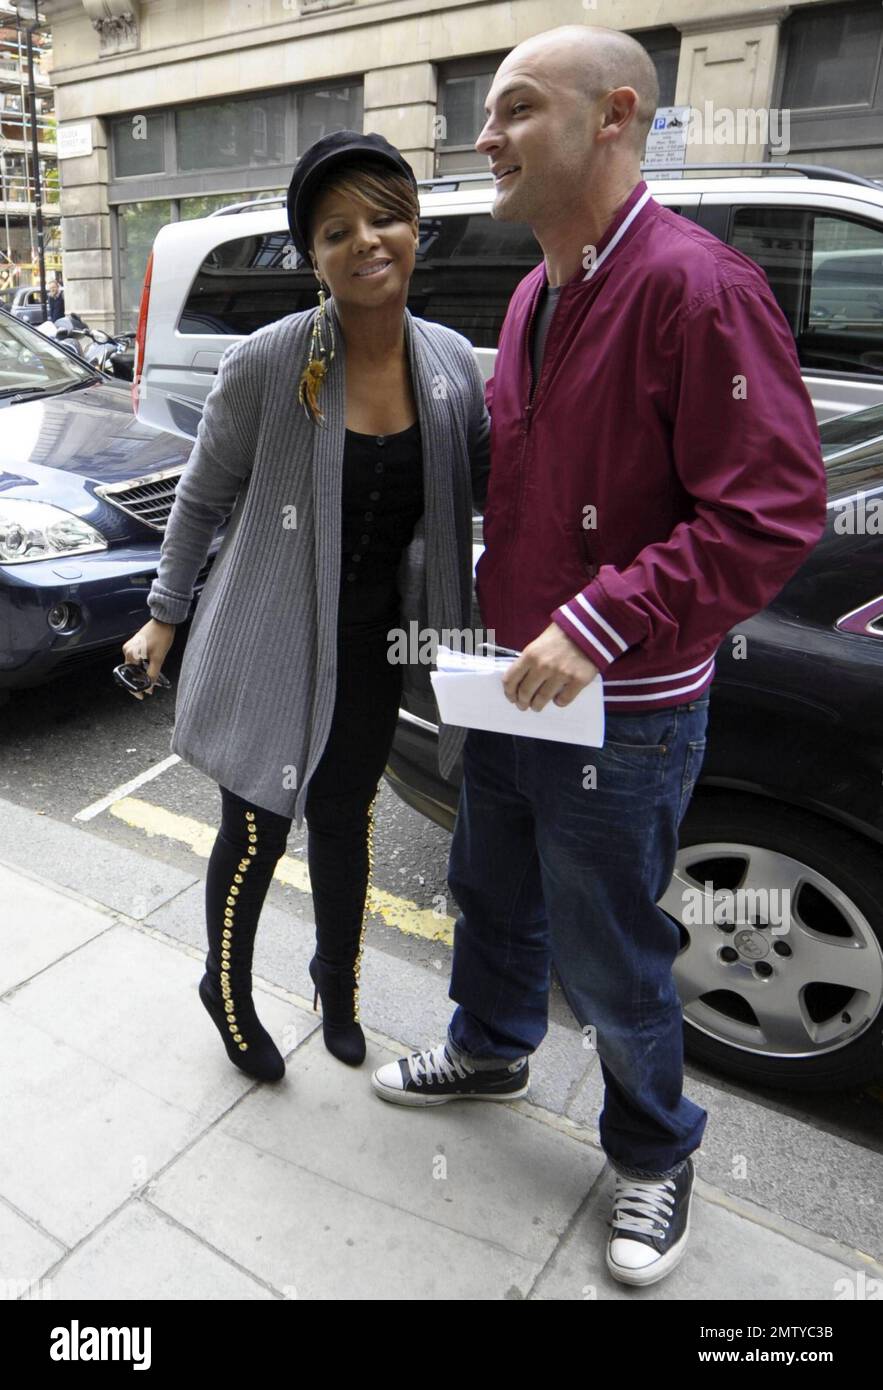 Singer Toni Braxton wears an all-black outfit of leggings, knee-high boots, leather jacket and hat as she arrives for an appearance at the BBC. Braxton greeted fans as she arrived, accompanied by bodyguards. London, UK. 5/12/10. Stock Photo